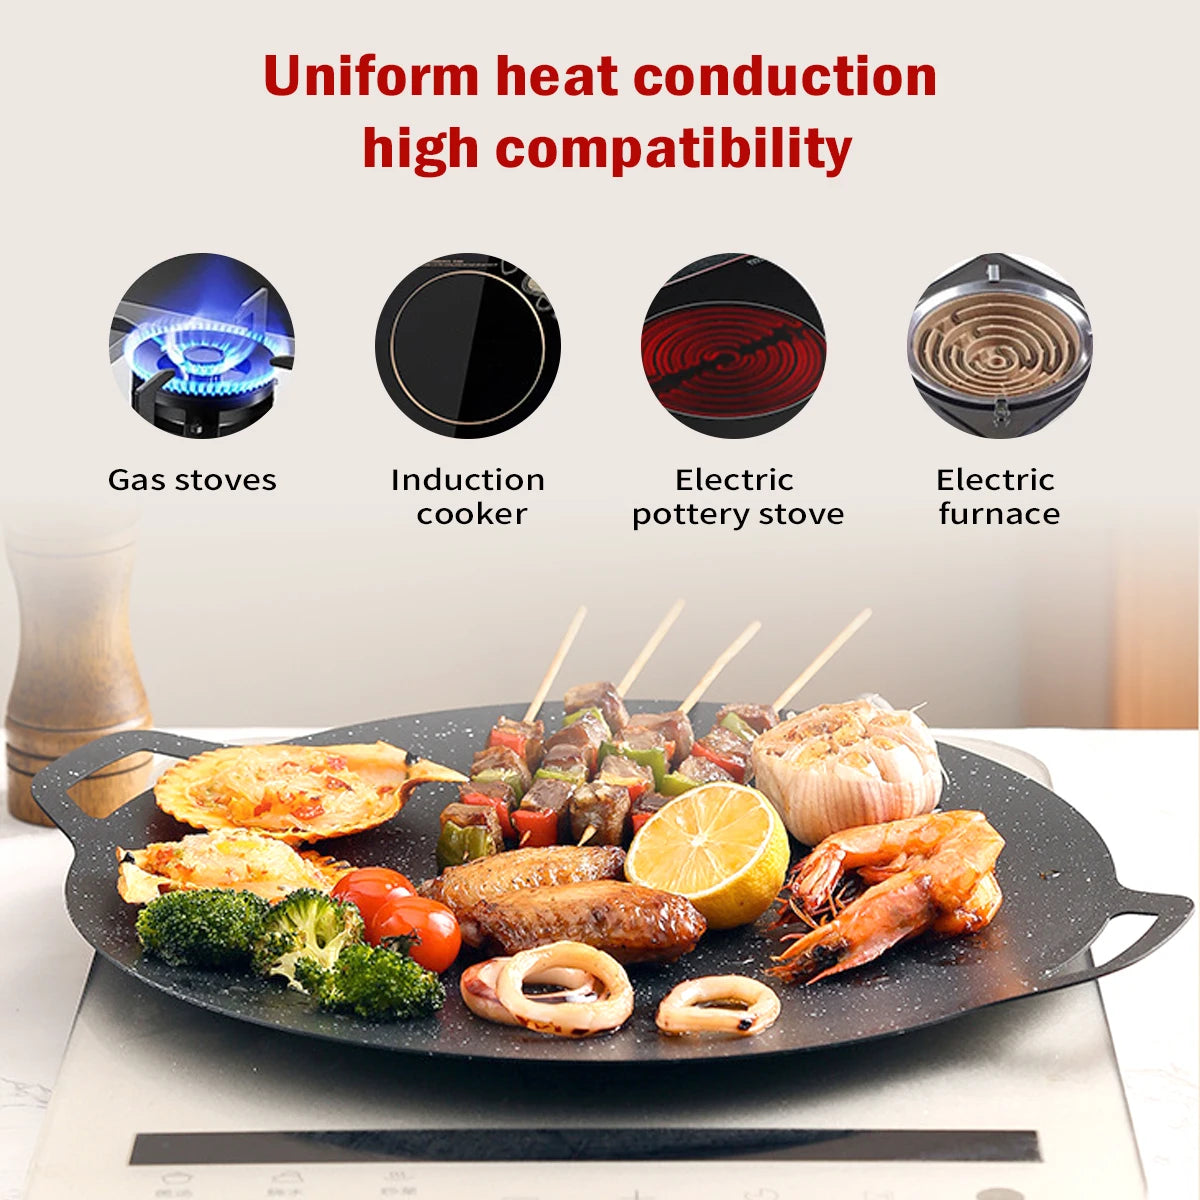 Round Korean BBQ Grill Pan - Perfect for Gas, Open Fire, Camping, and Home Outdoor Cooking - Available in Multiple Sizes - Sleek Black Design